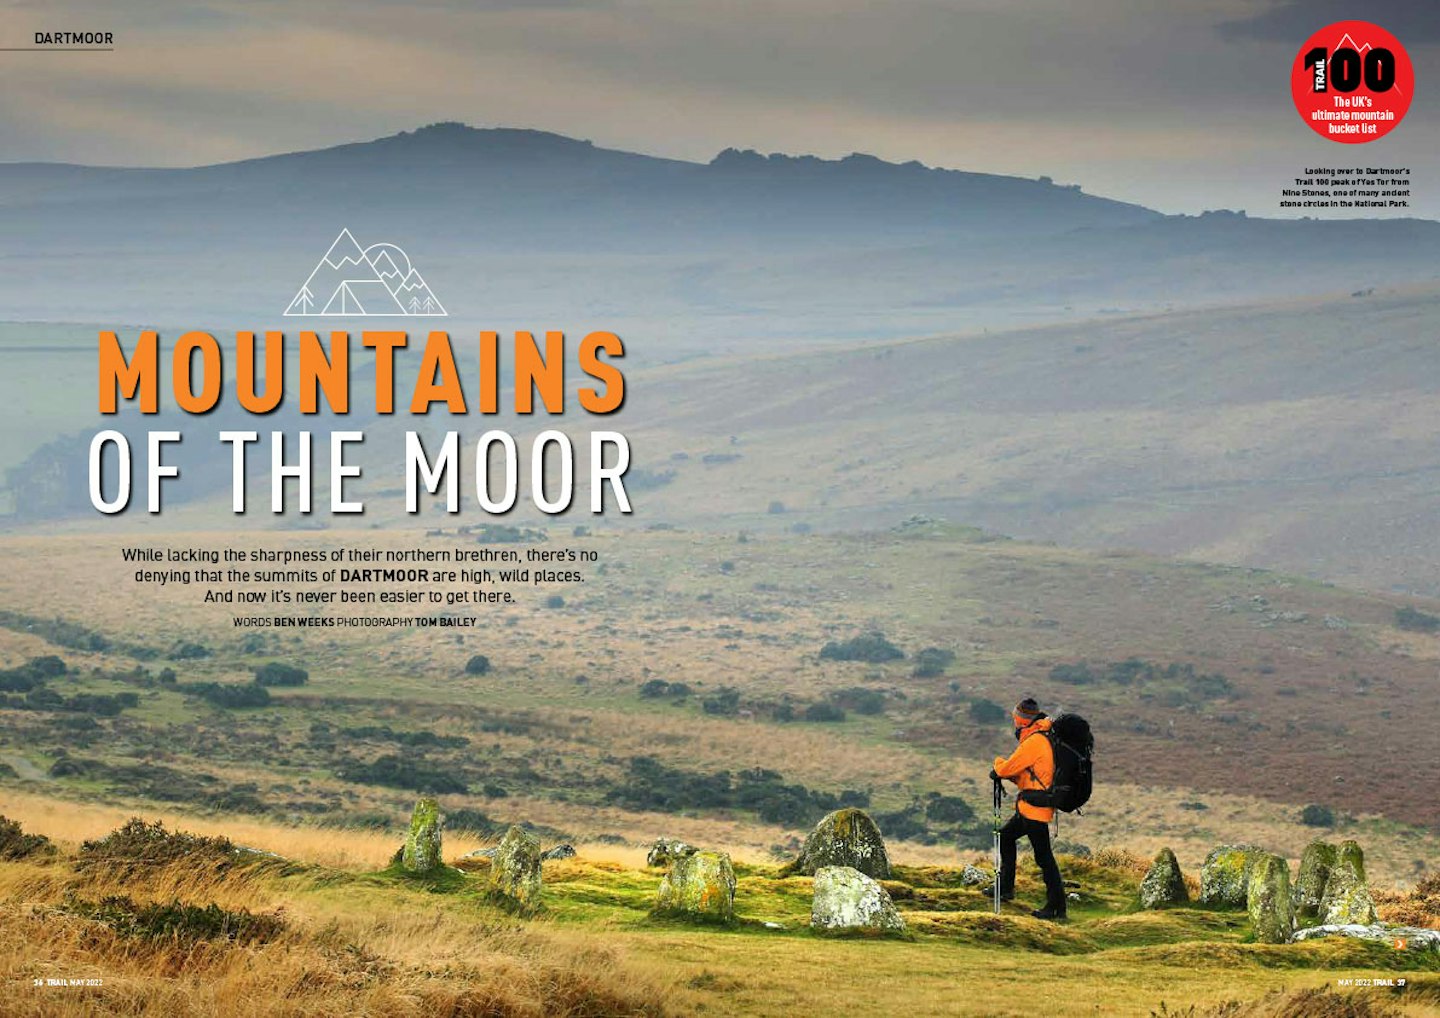 Mountains of the moor